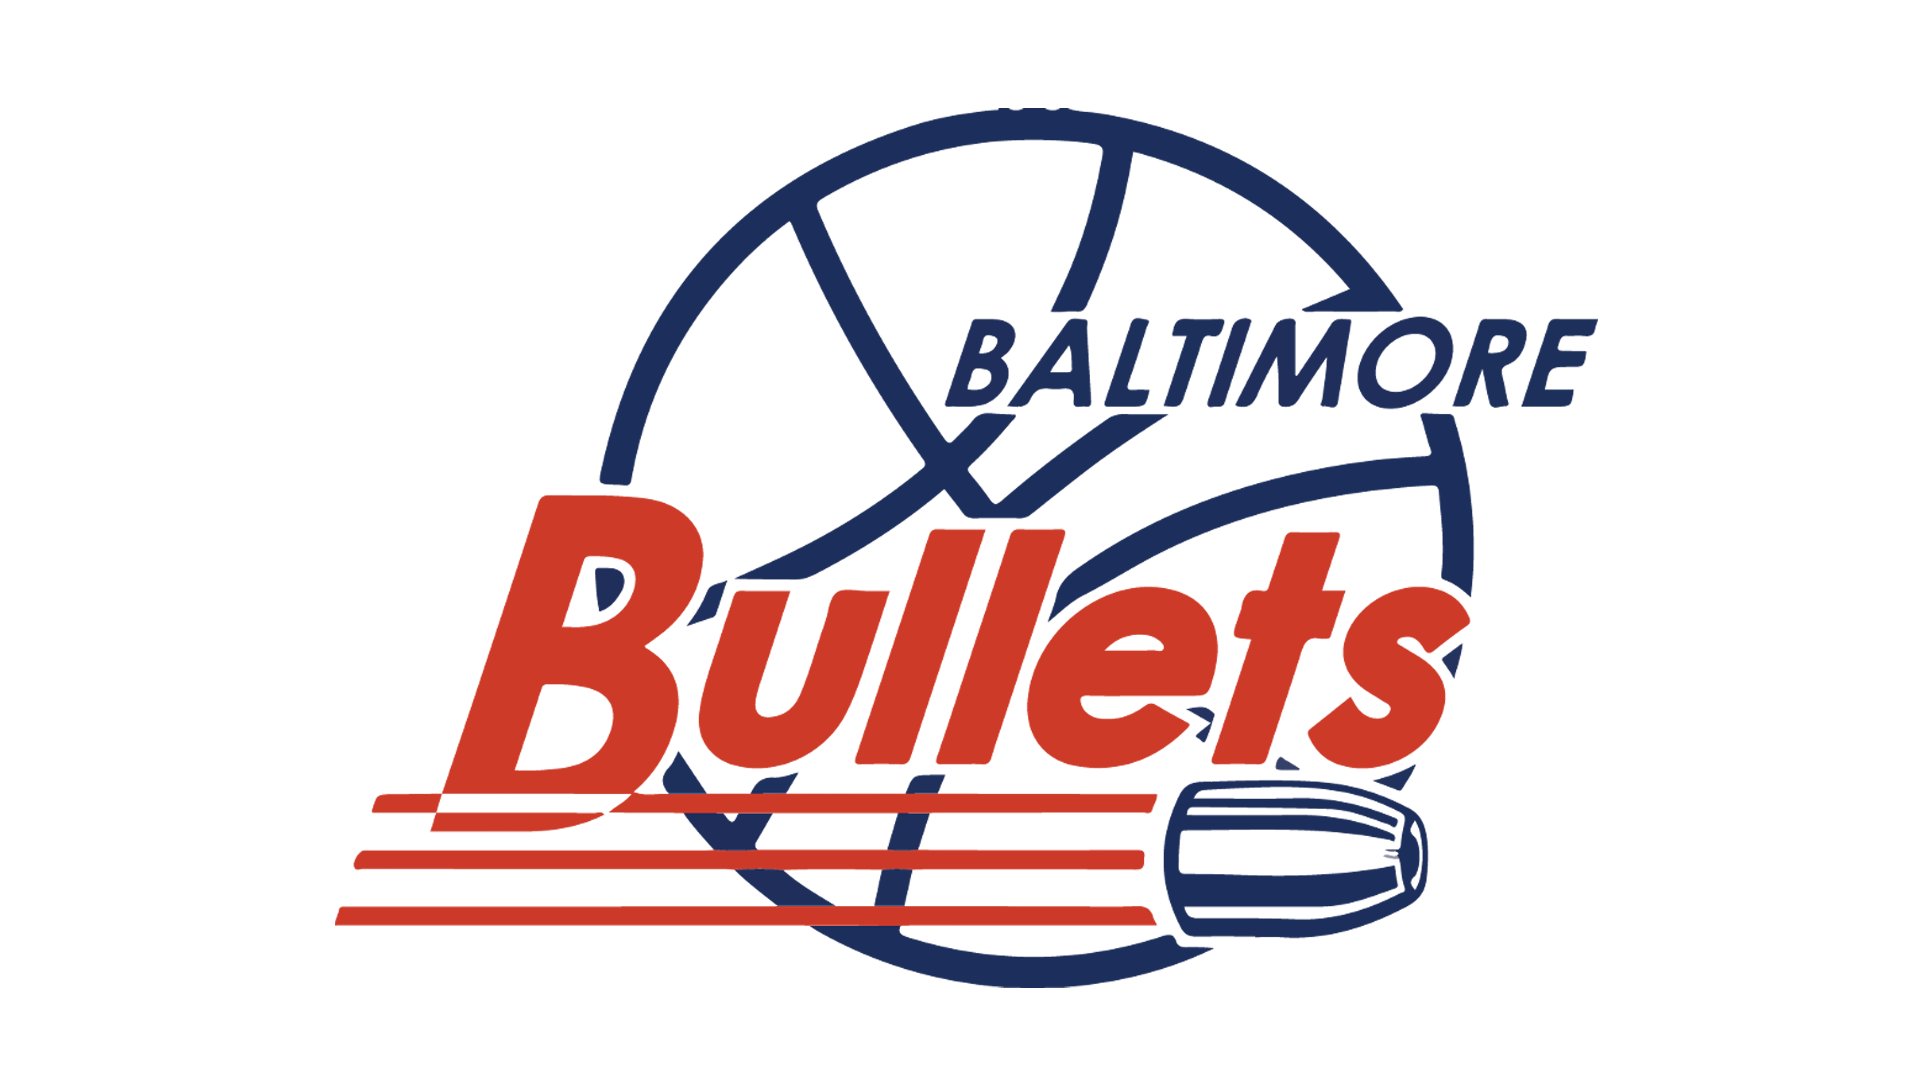 Bullets Logo - Meaning Baltimore Bullets logo and symbol | history and evolution